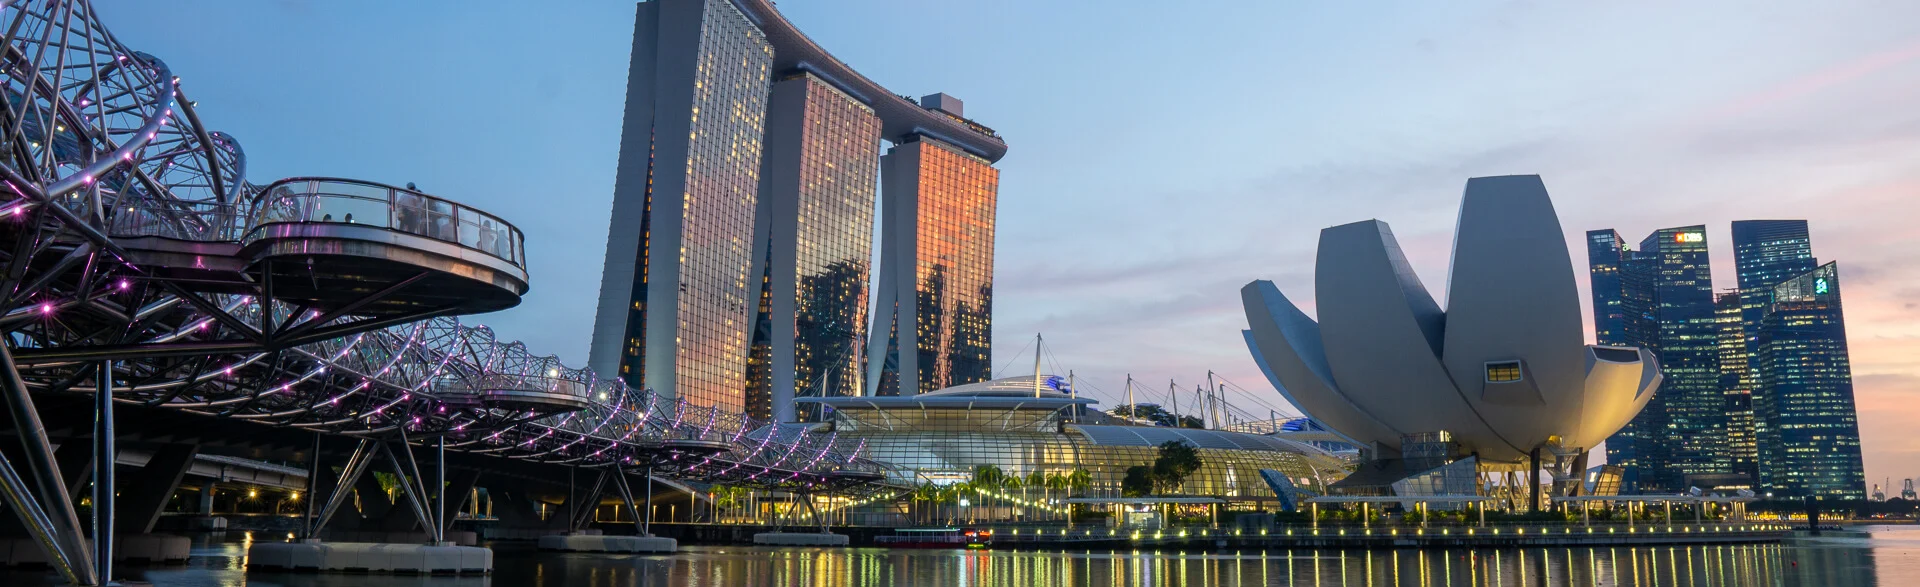 Singapore Marina Bay Sands and the waterfront are some of the best things to do in Singapore.